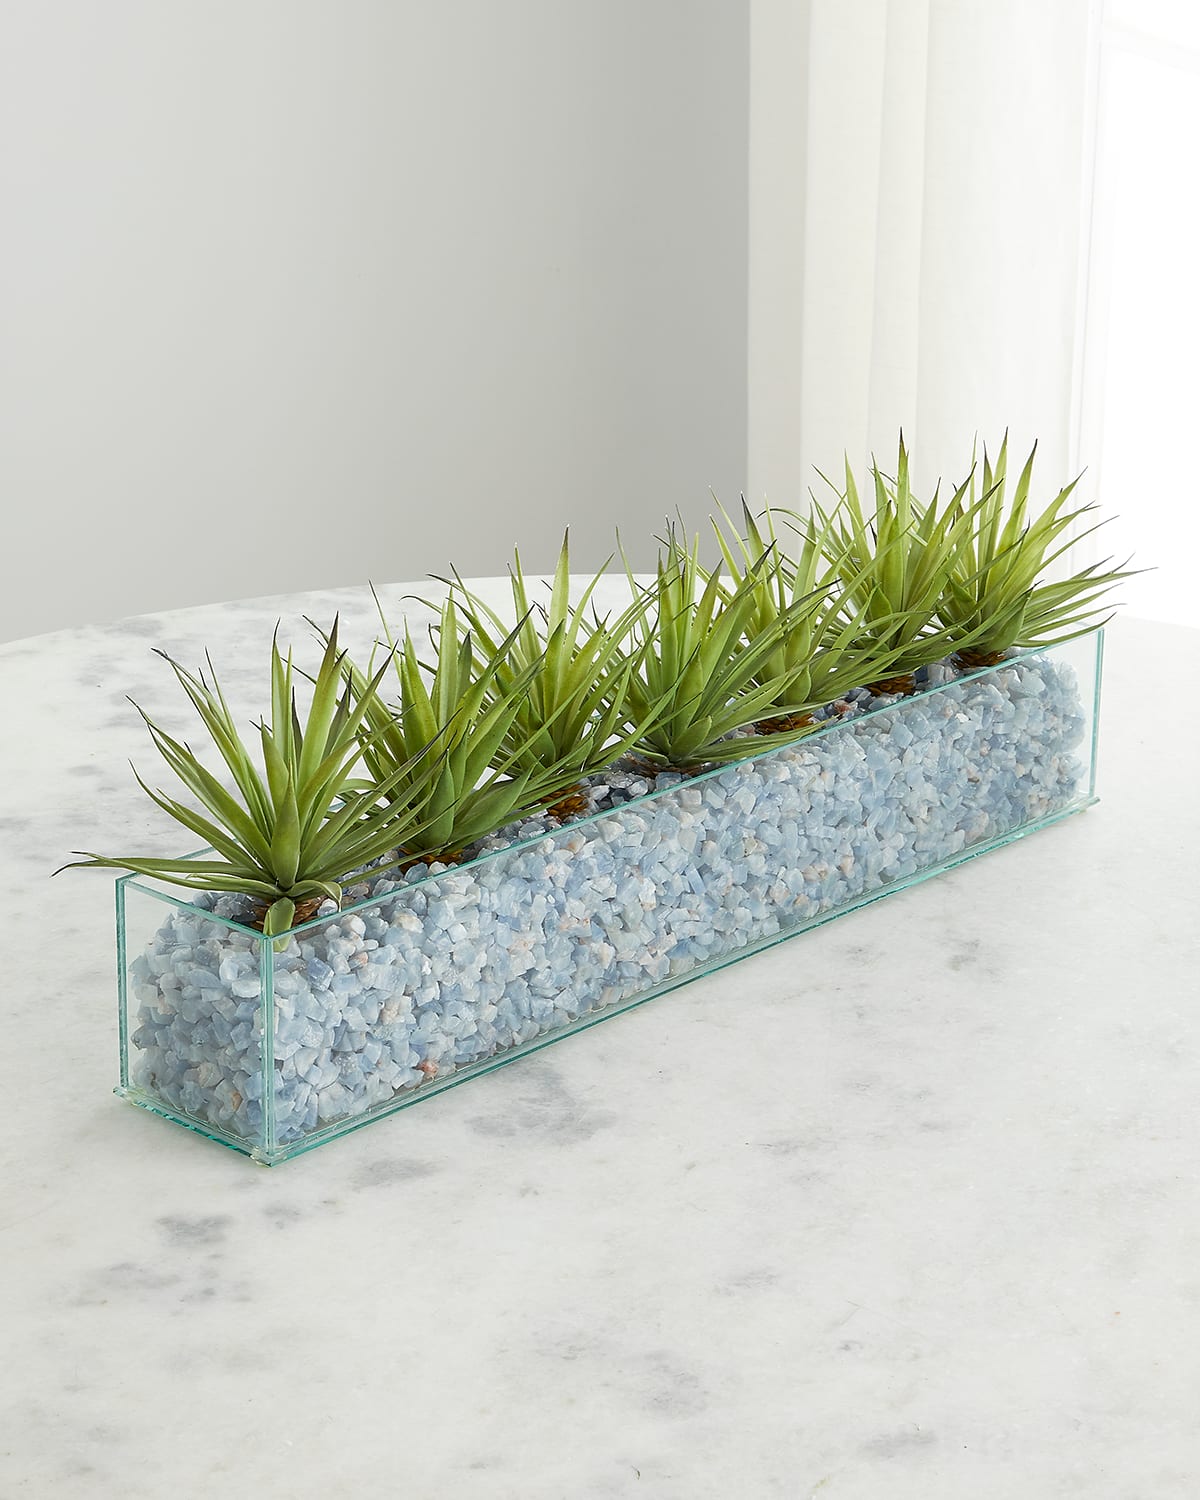 Shop T & C Floral Company Agave In Rectangular Glass Container Faux Floral Arrangement In Dark Green Agave